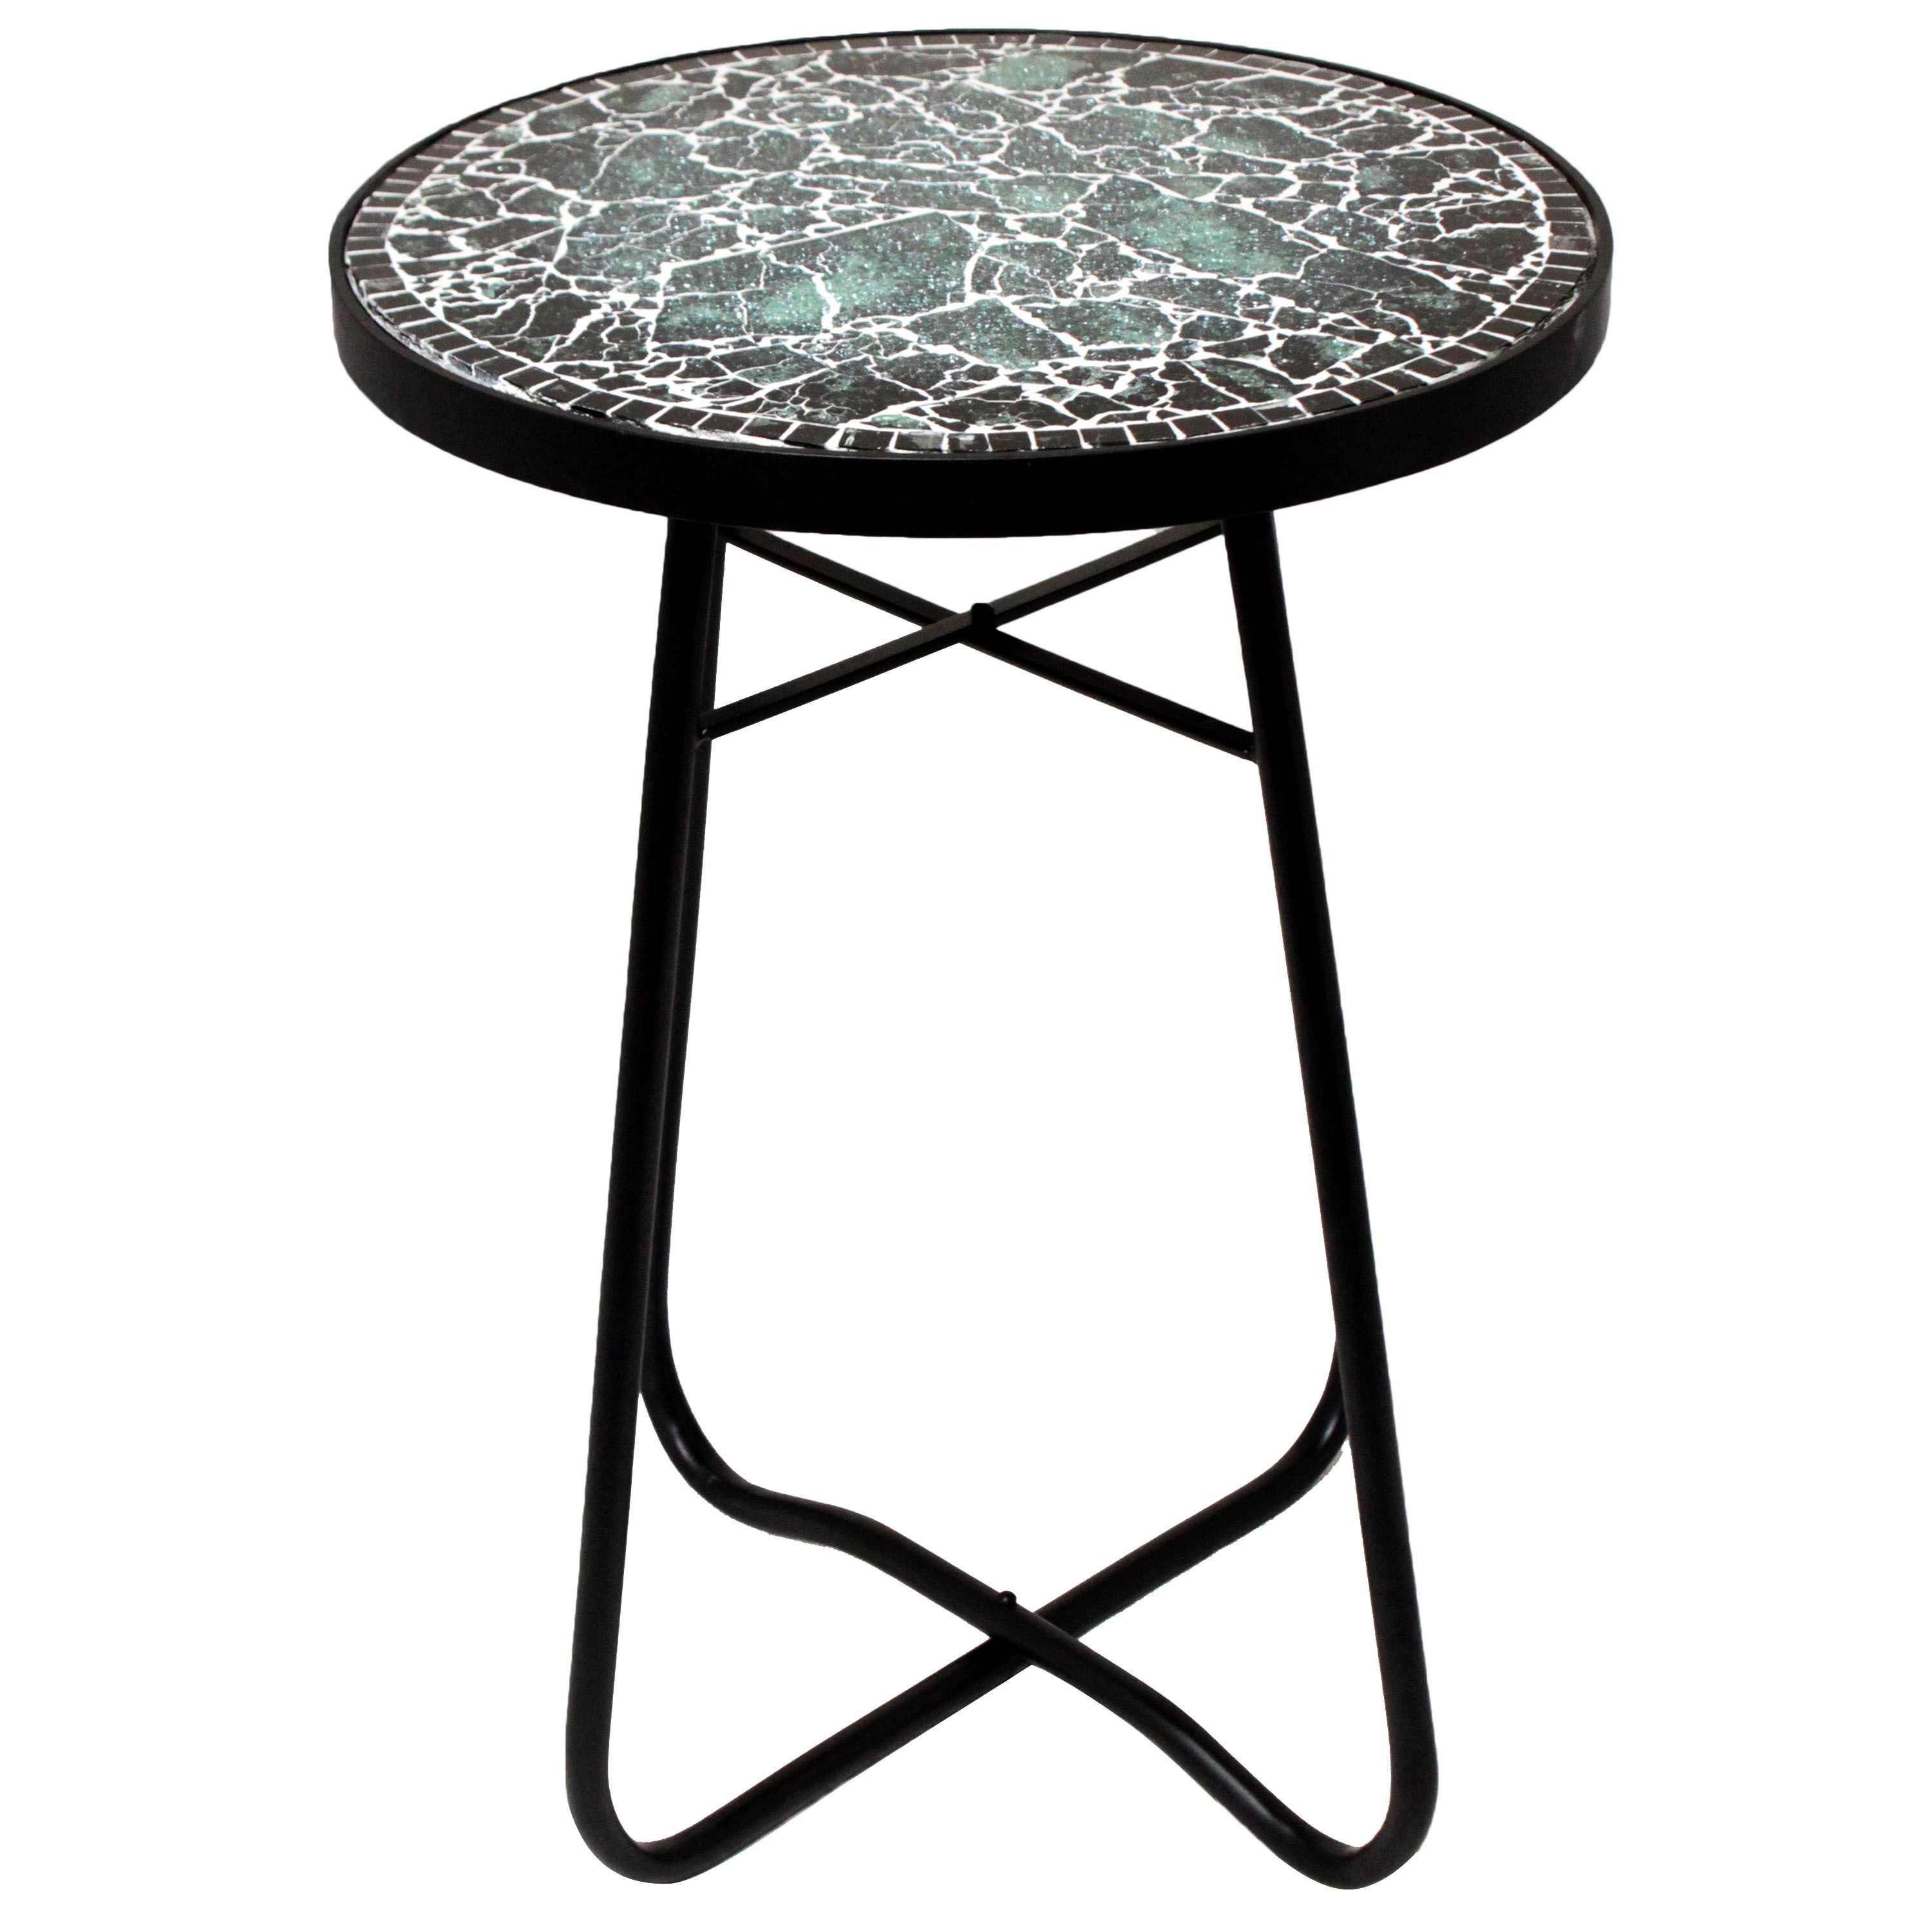 black mosaic round patio side accent table free shipping square today bent acrylic coffee reading light for mirror dining small stool storage with baskets wide threshold wood